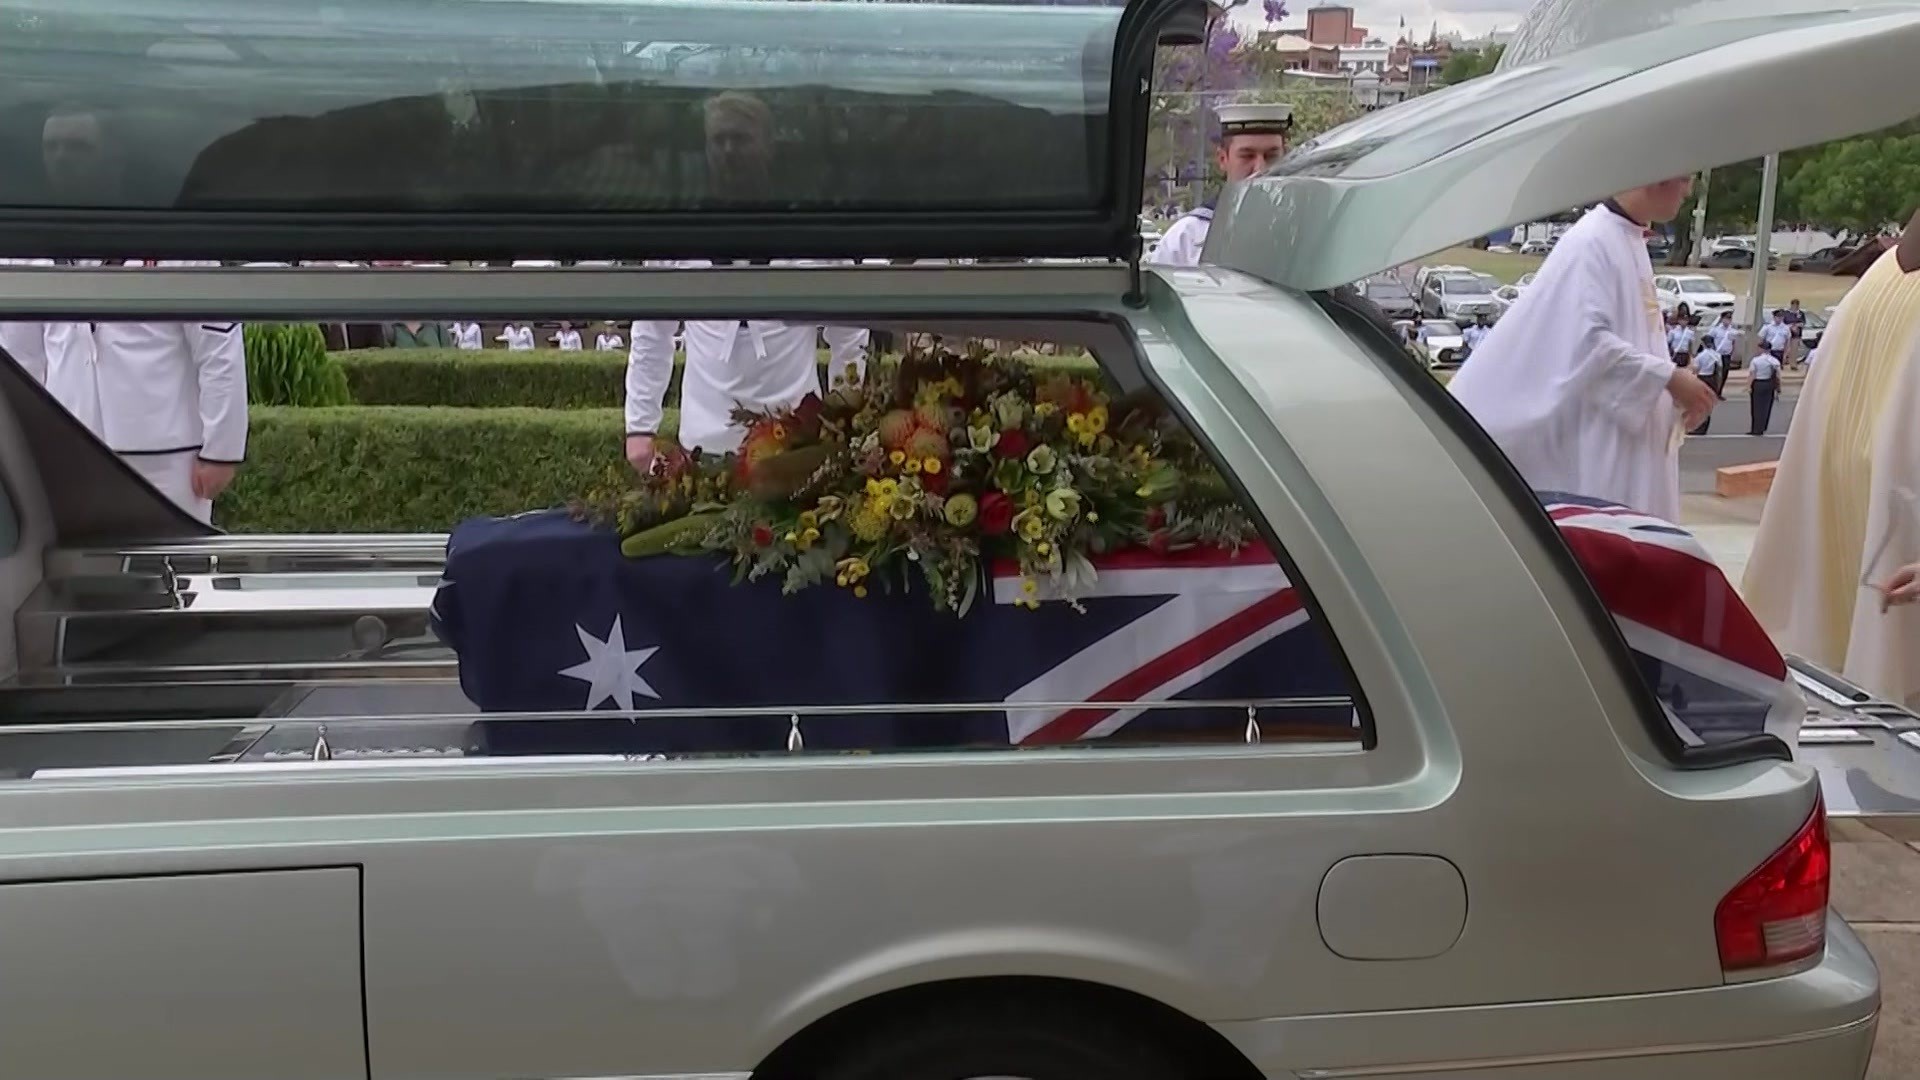 Bill Hayden's coffin leaves the church in a herse with flowers.